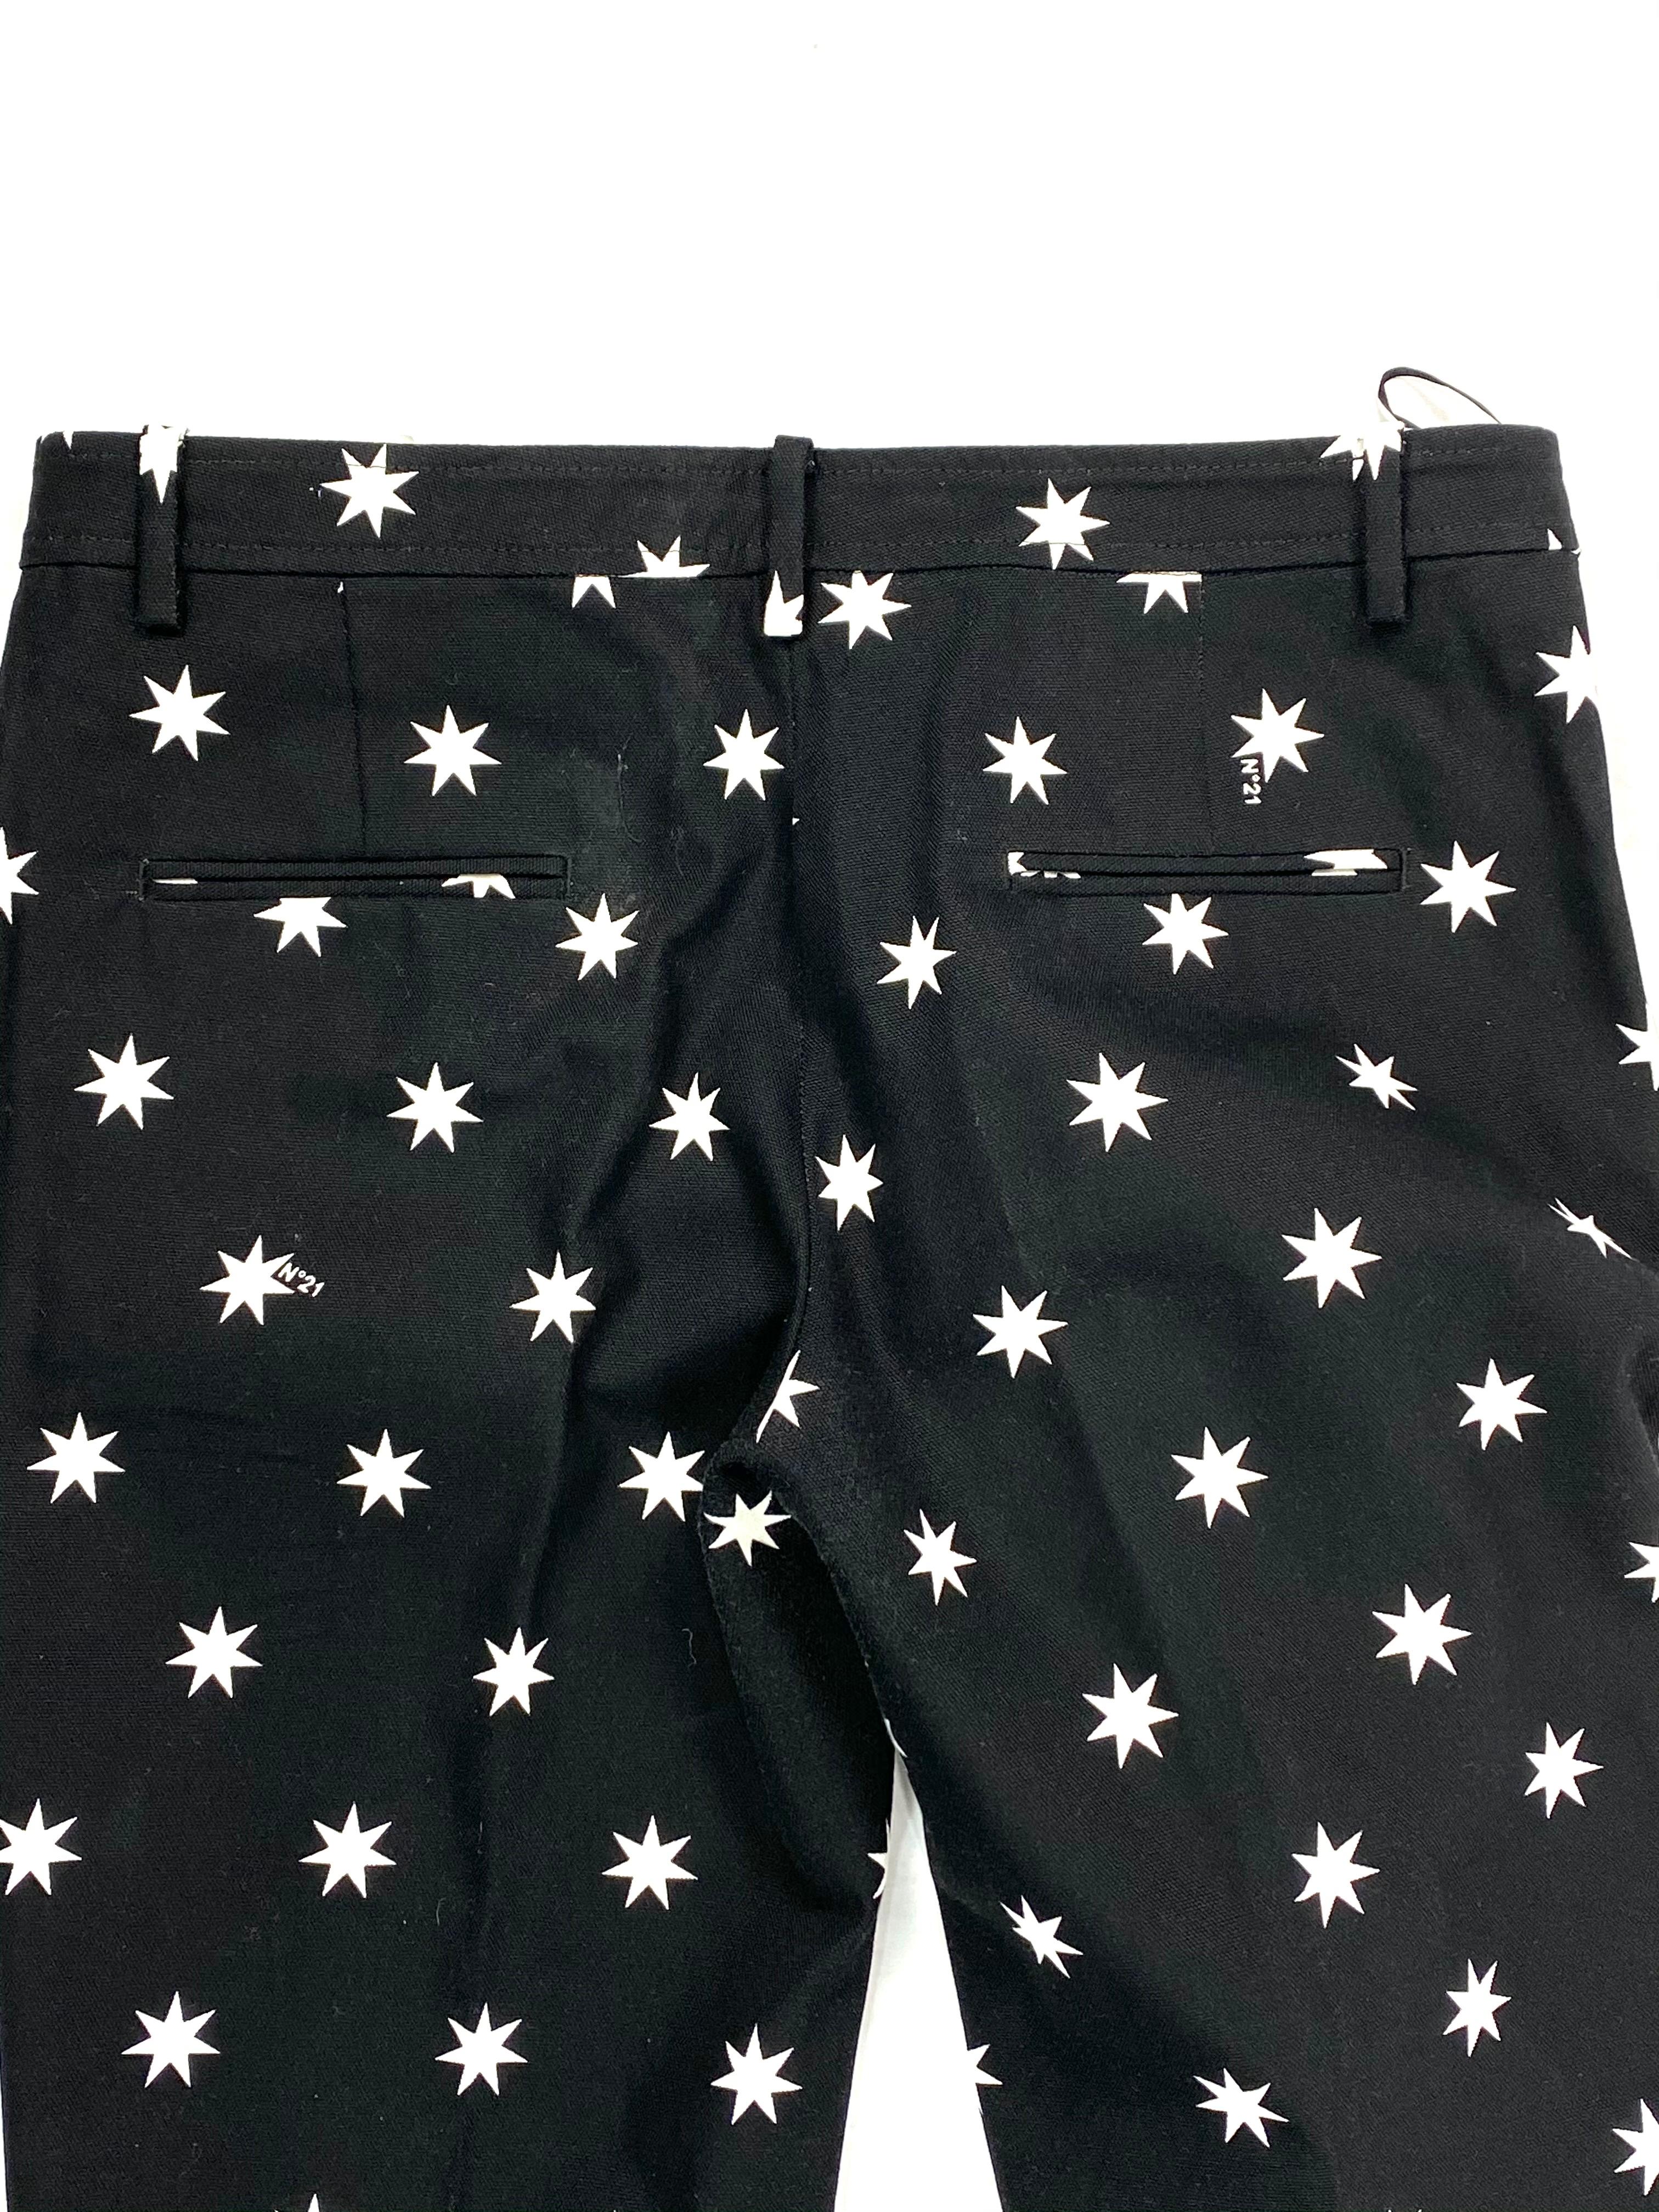 Women's NO. 21 Black and White Cotton Star Pants, Size 44 For Sale